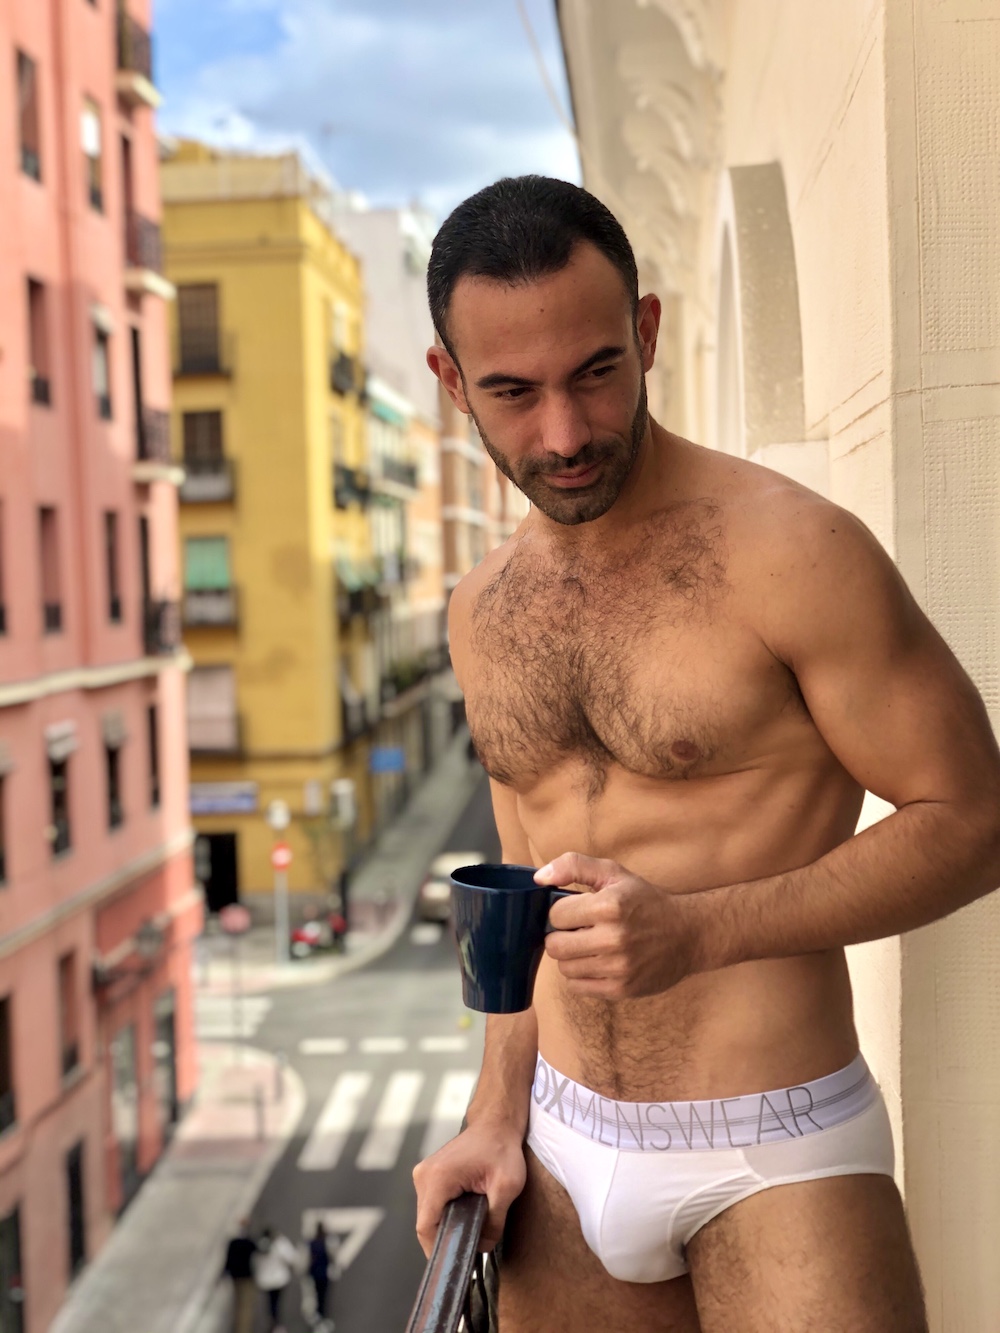 Stay at Home – Actor Sebastian in Paris and Madrid – underwear from various brands